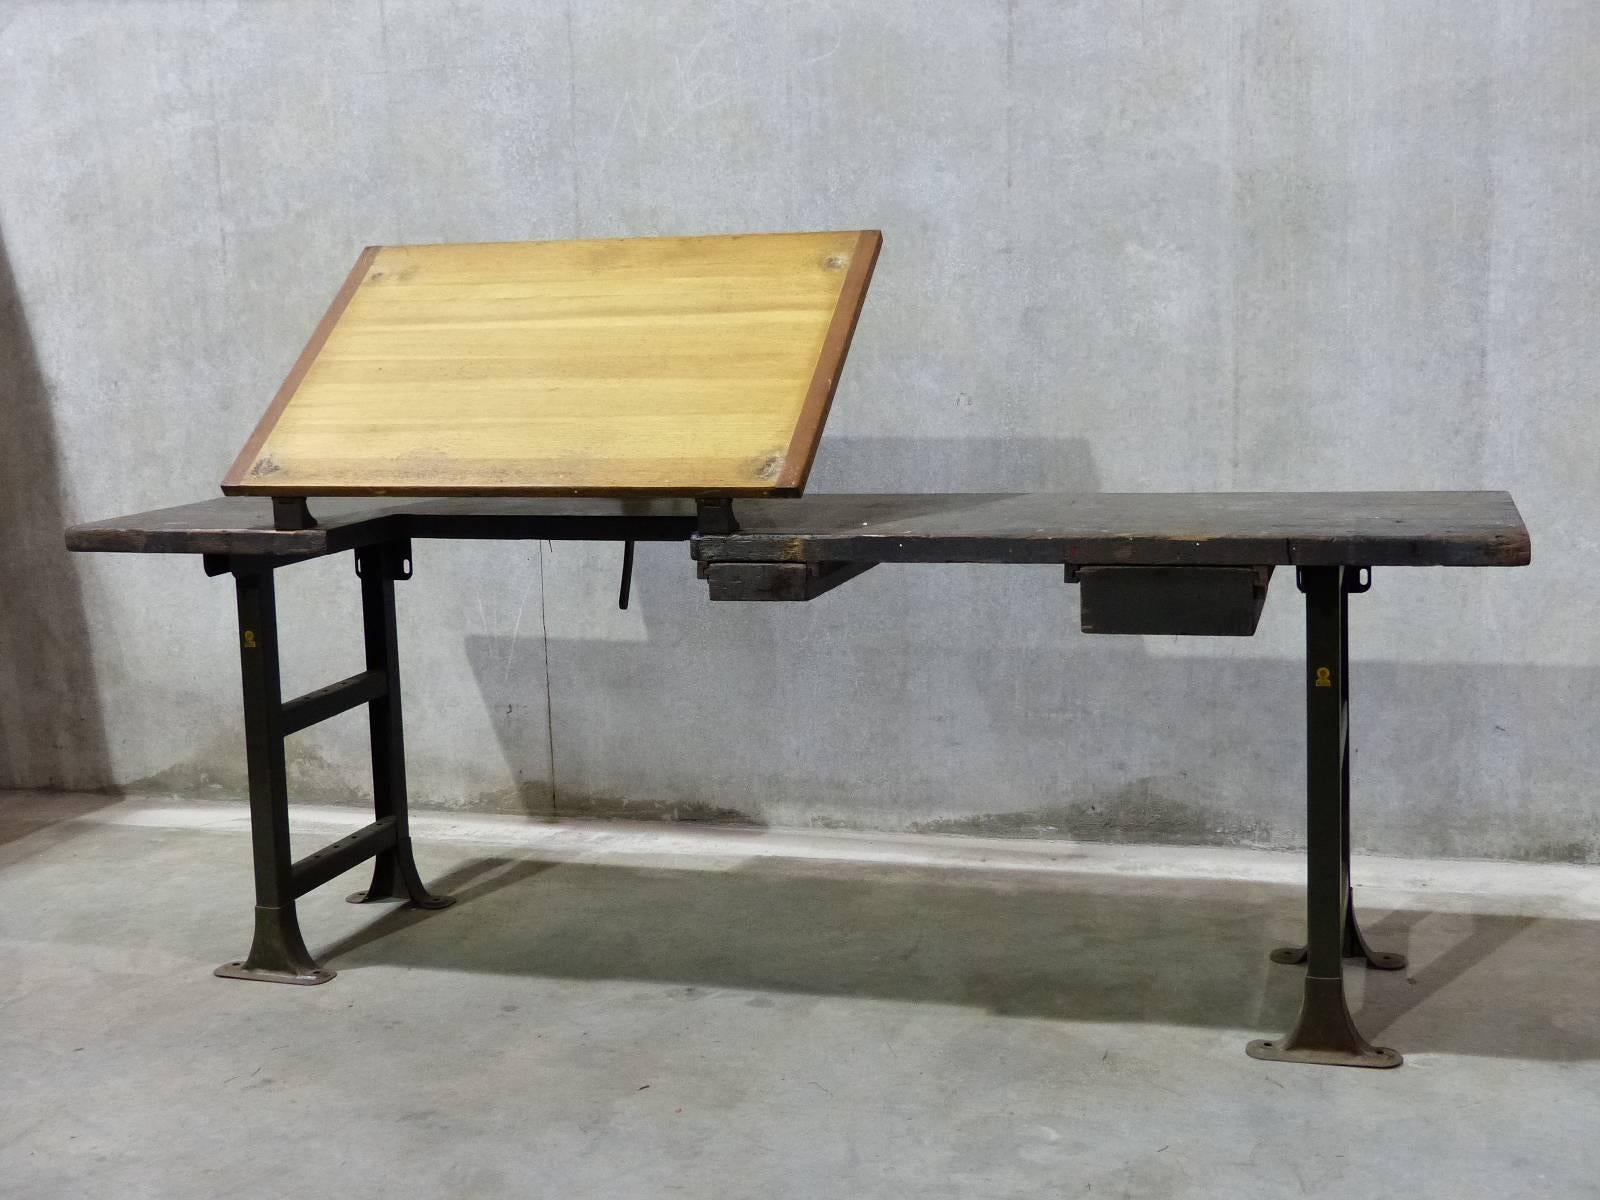 Fully adjustable drafting table top with full work station made by 